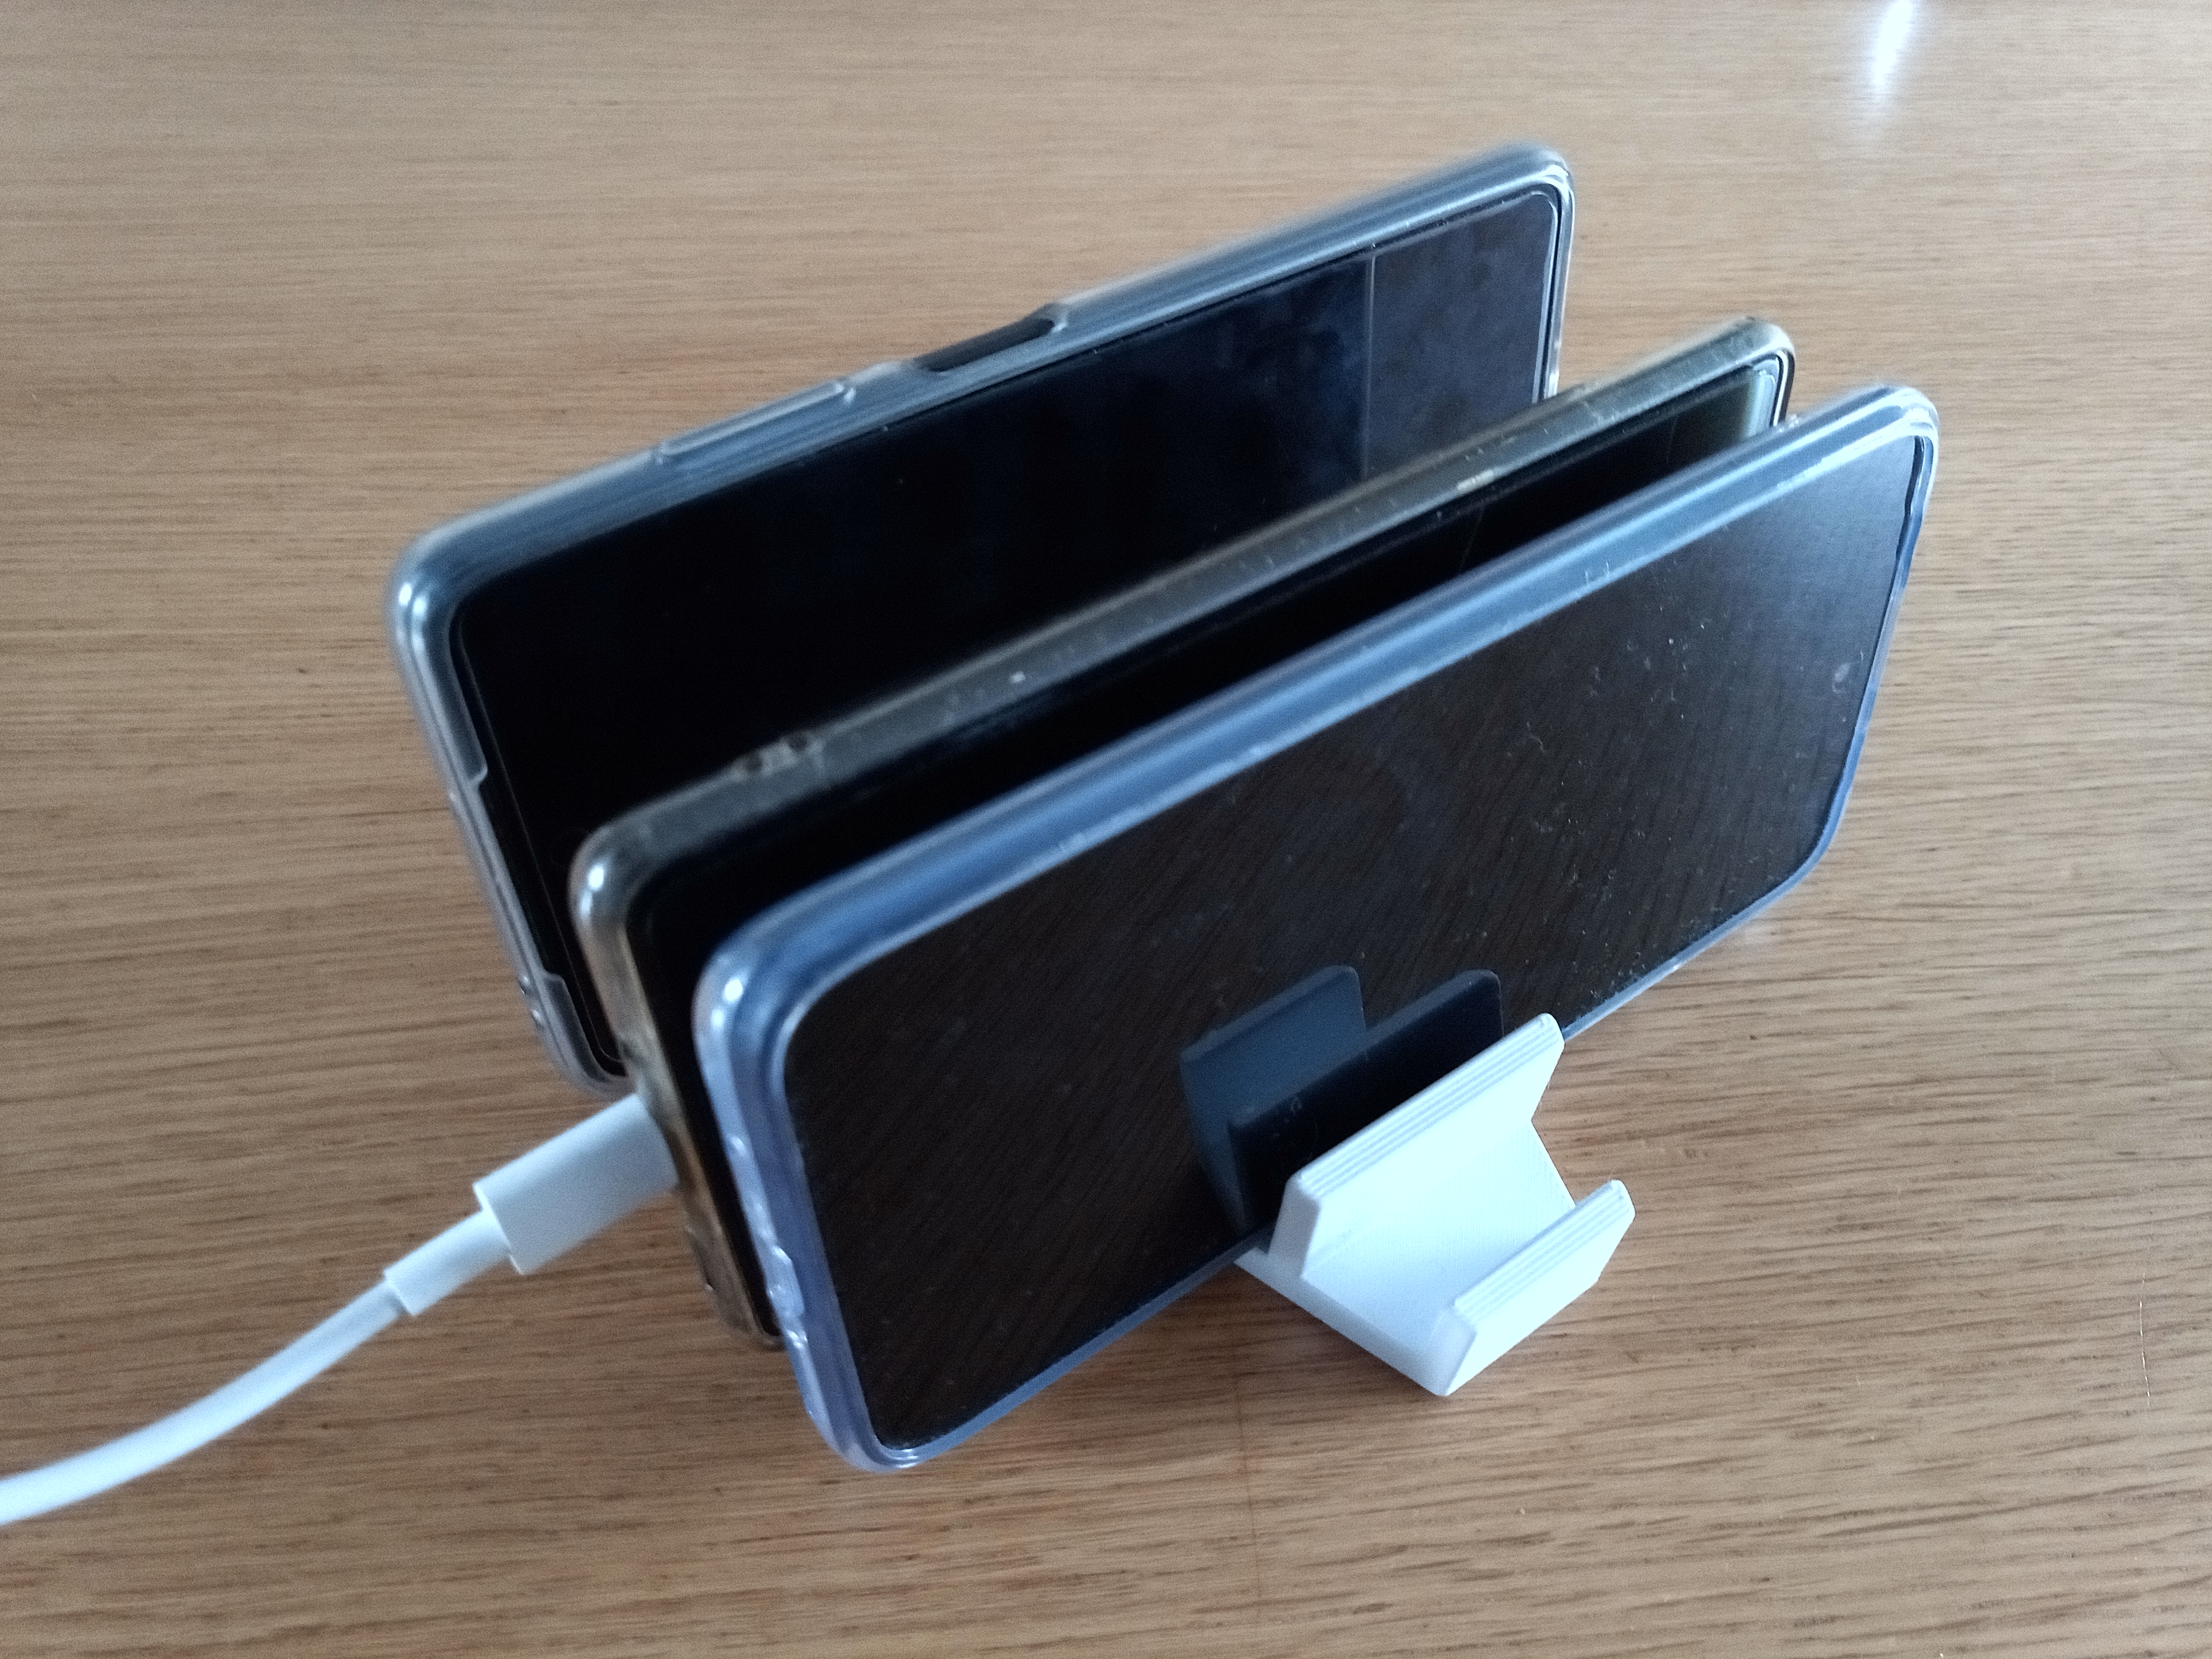 Multi phone and tablet stand